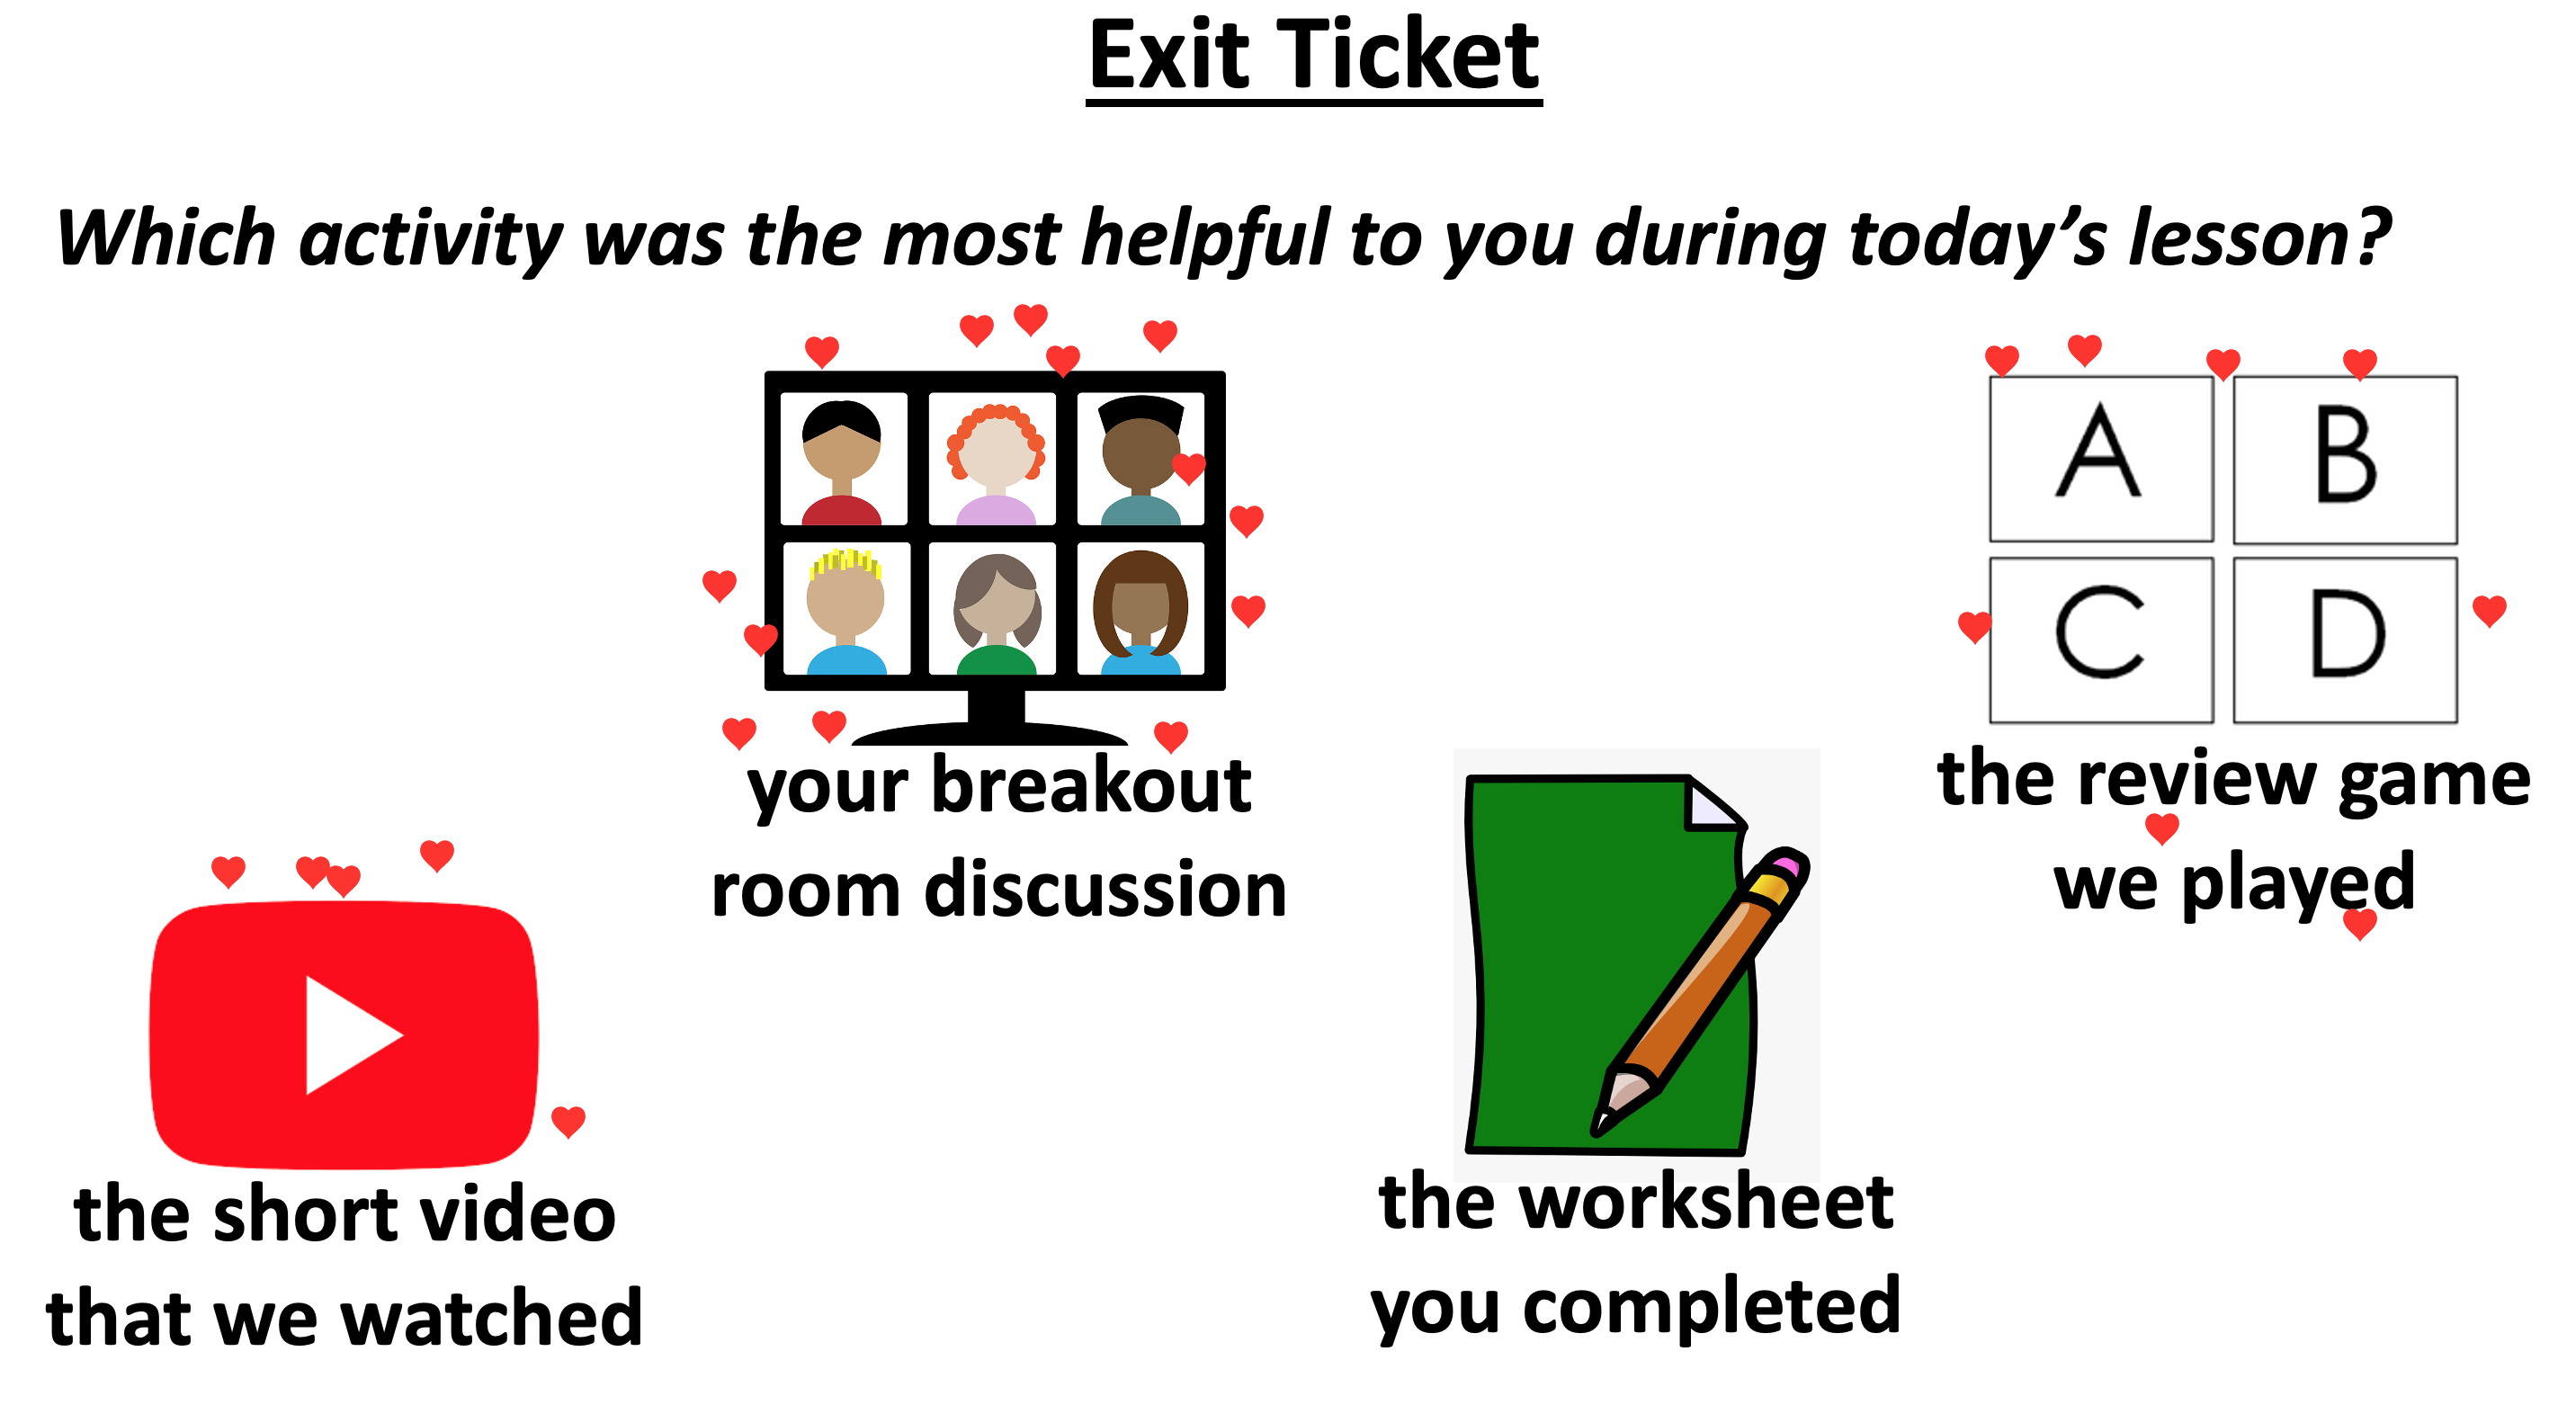 a screenshot of a zoom activity where students have placed stamps on their favorite part of a lesson. The choices are short video, breakout room, worksheet, and review game. Breakout room has the most stamps- 13.